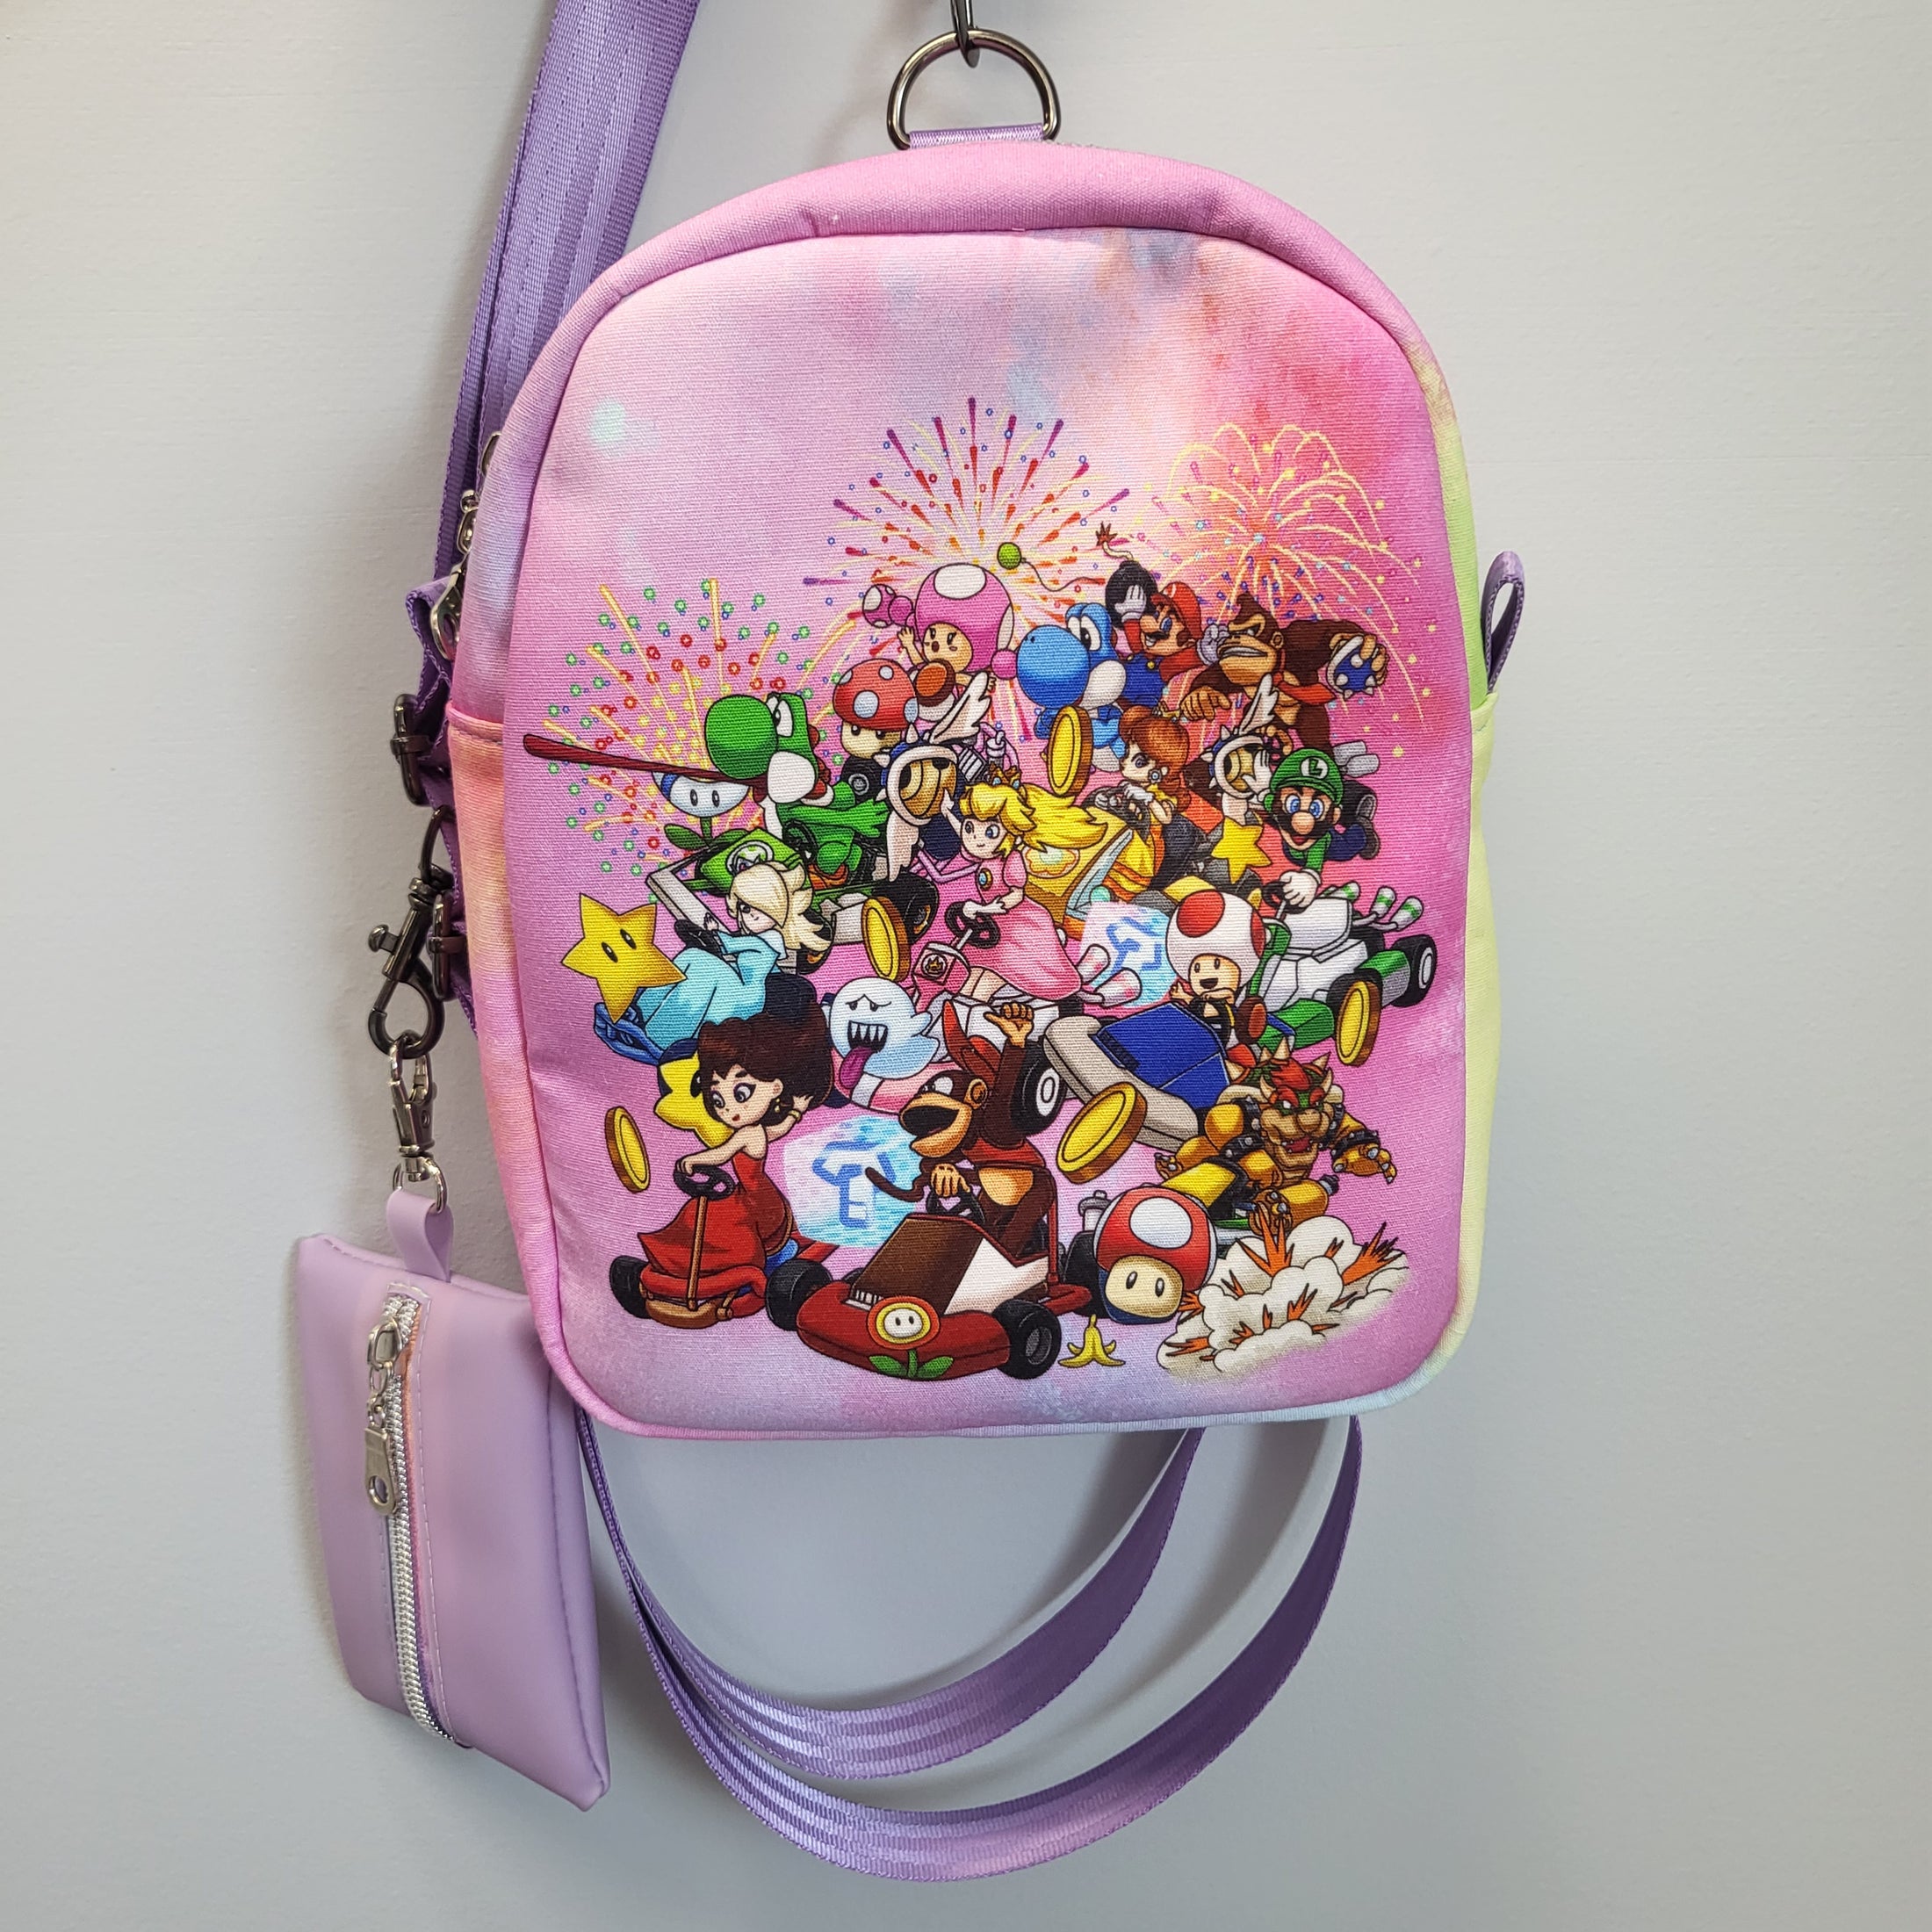 Mario Kart inspired bag that can be worn as a sling or backpack.